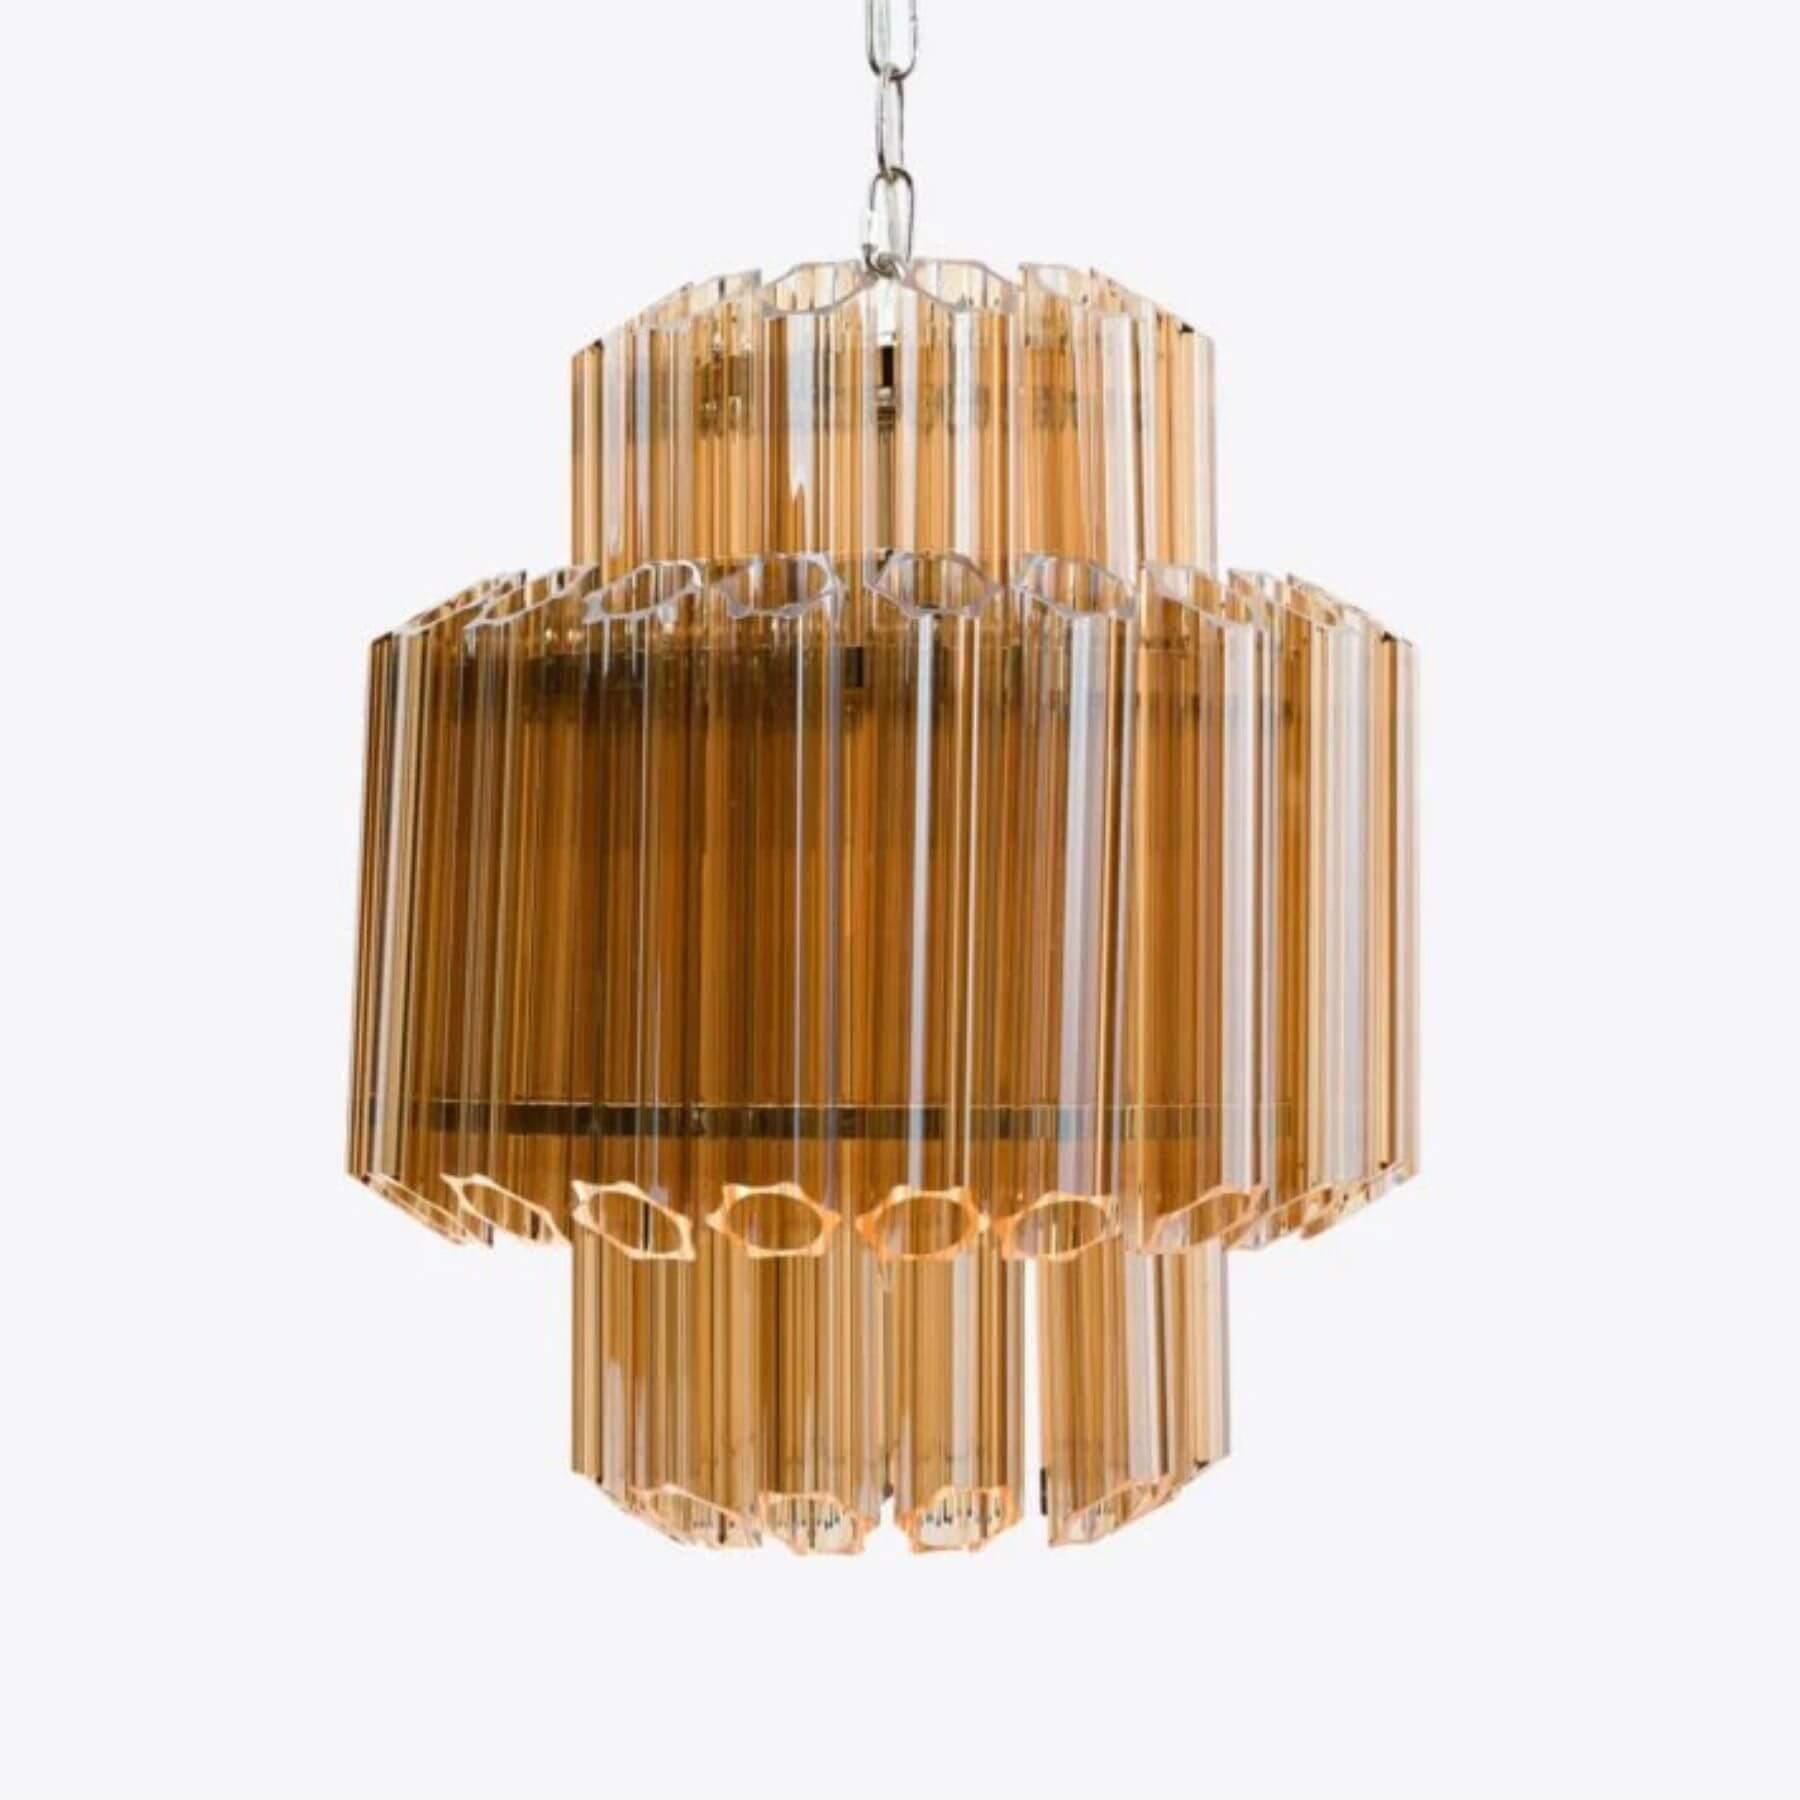 Pure White Lines Piccolo Palermo Chandelier Polished Nickel Amber Orange